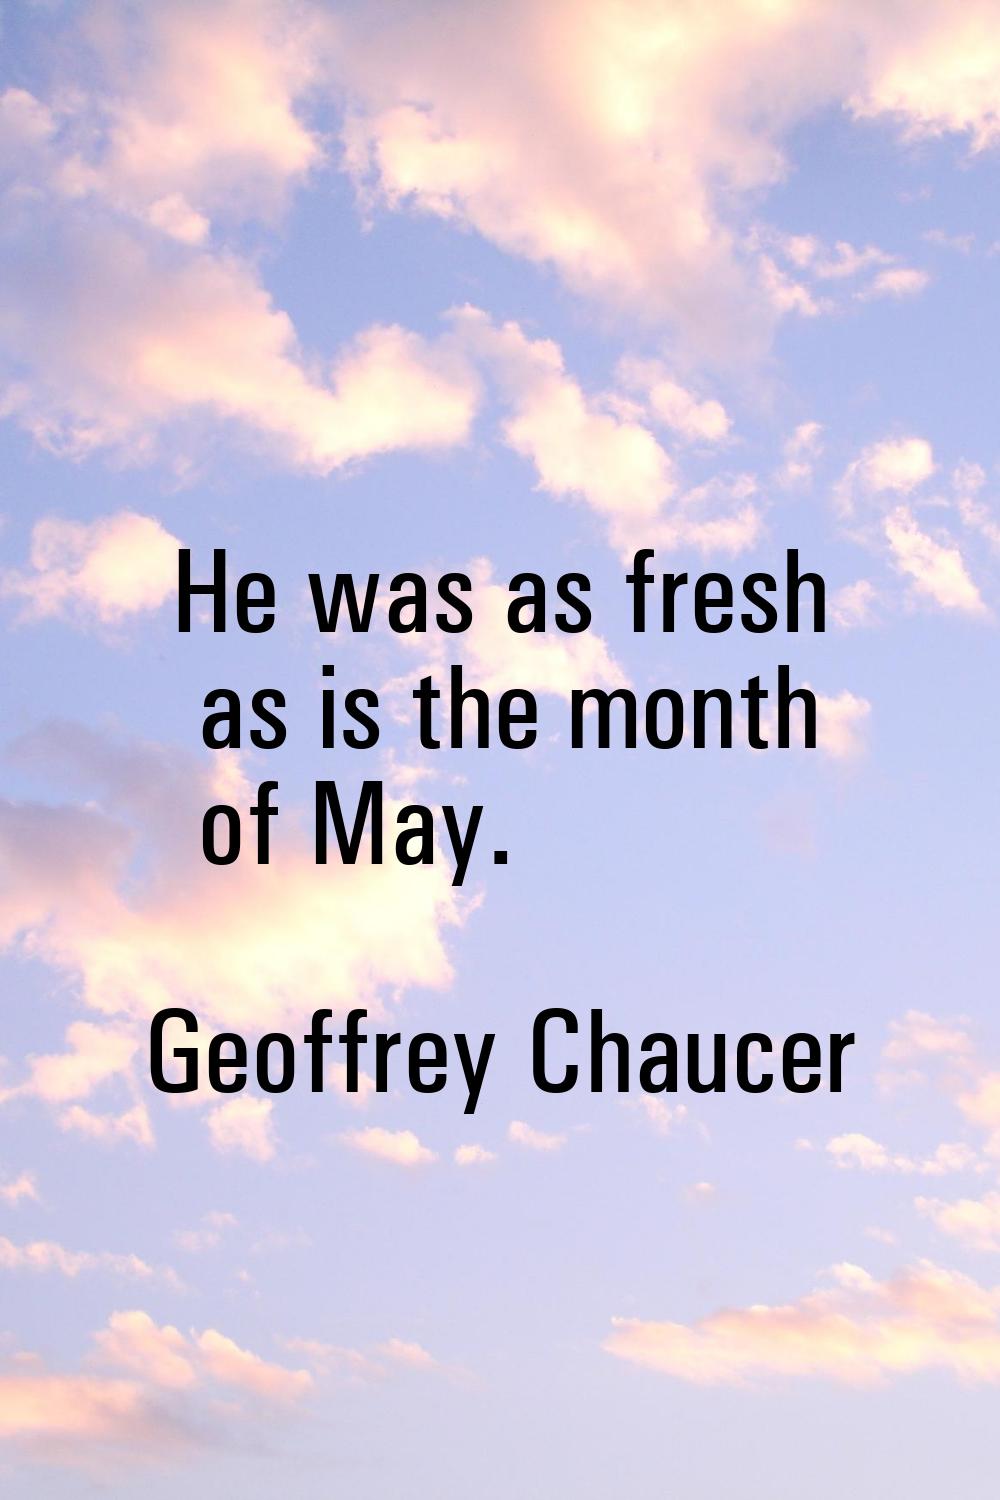 He was as fresh as is the month of May.